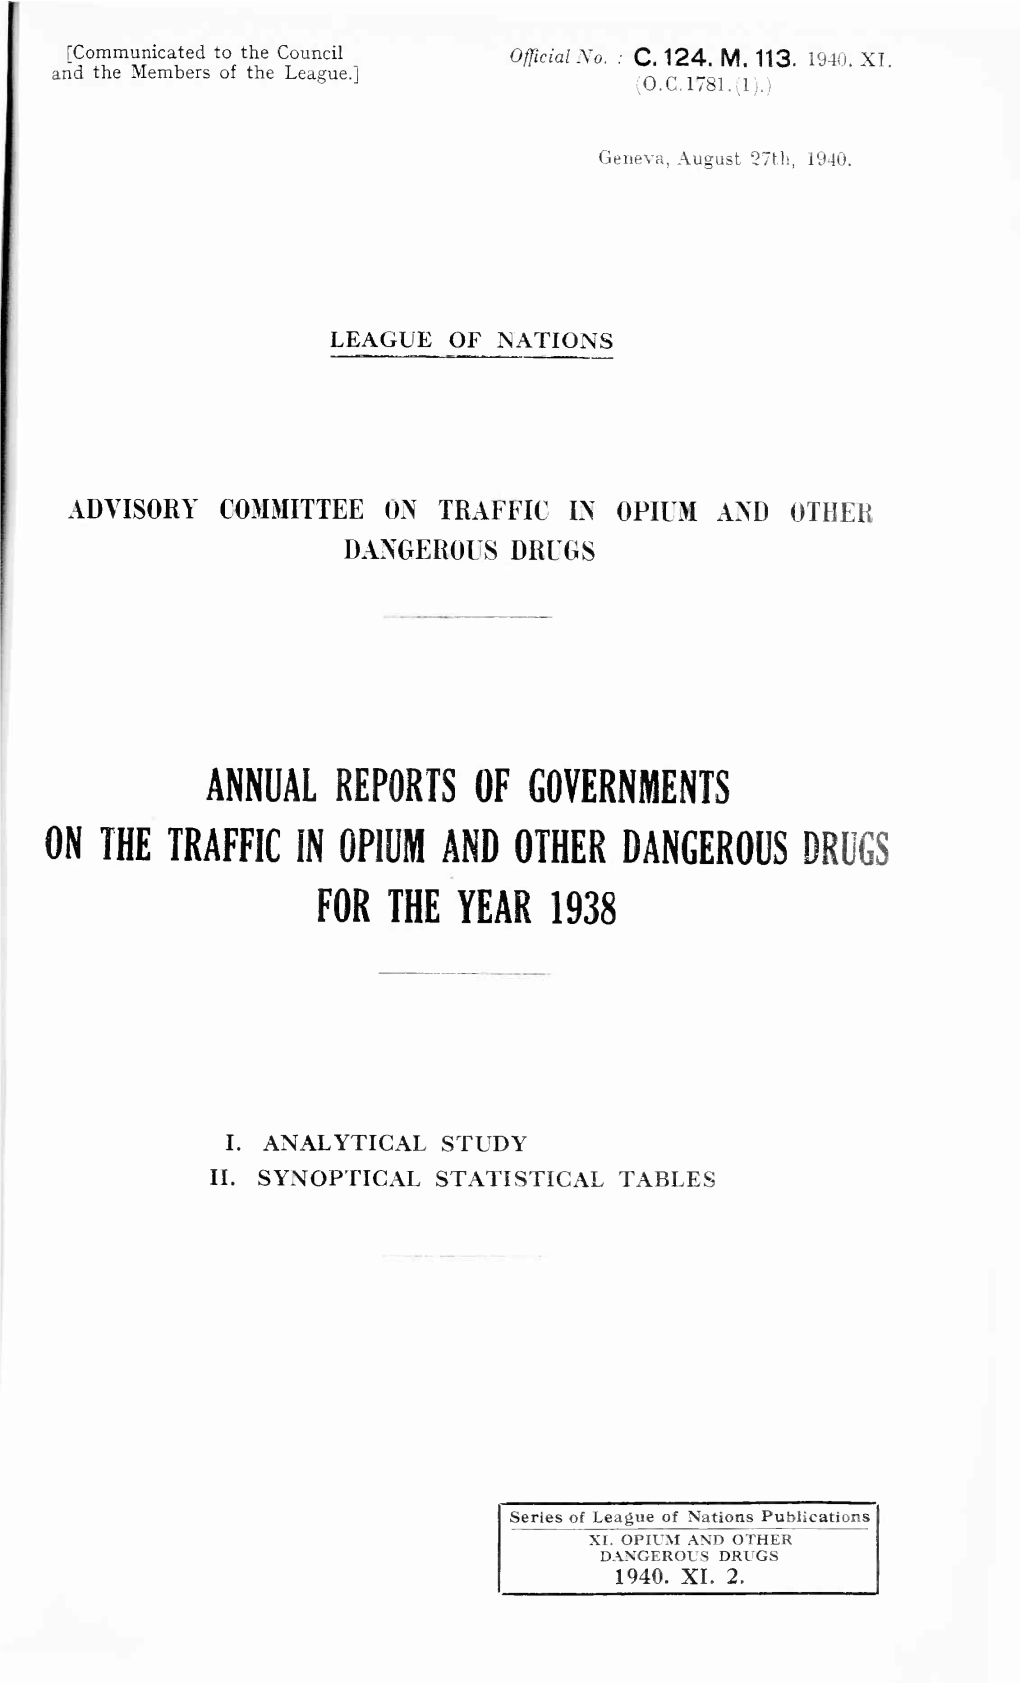 Annual Reports of Governments on the Traffic in Opium and Other Dangerous Drugs for the Year 1 9 3 8